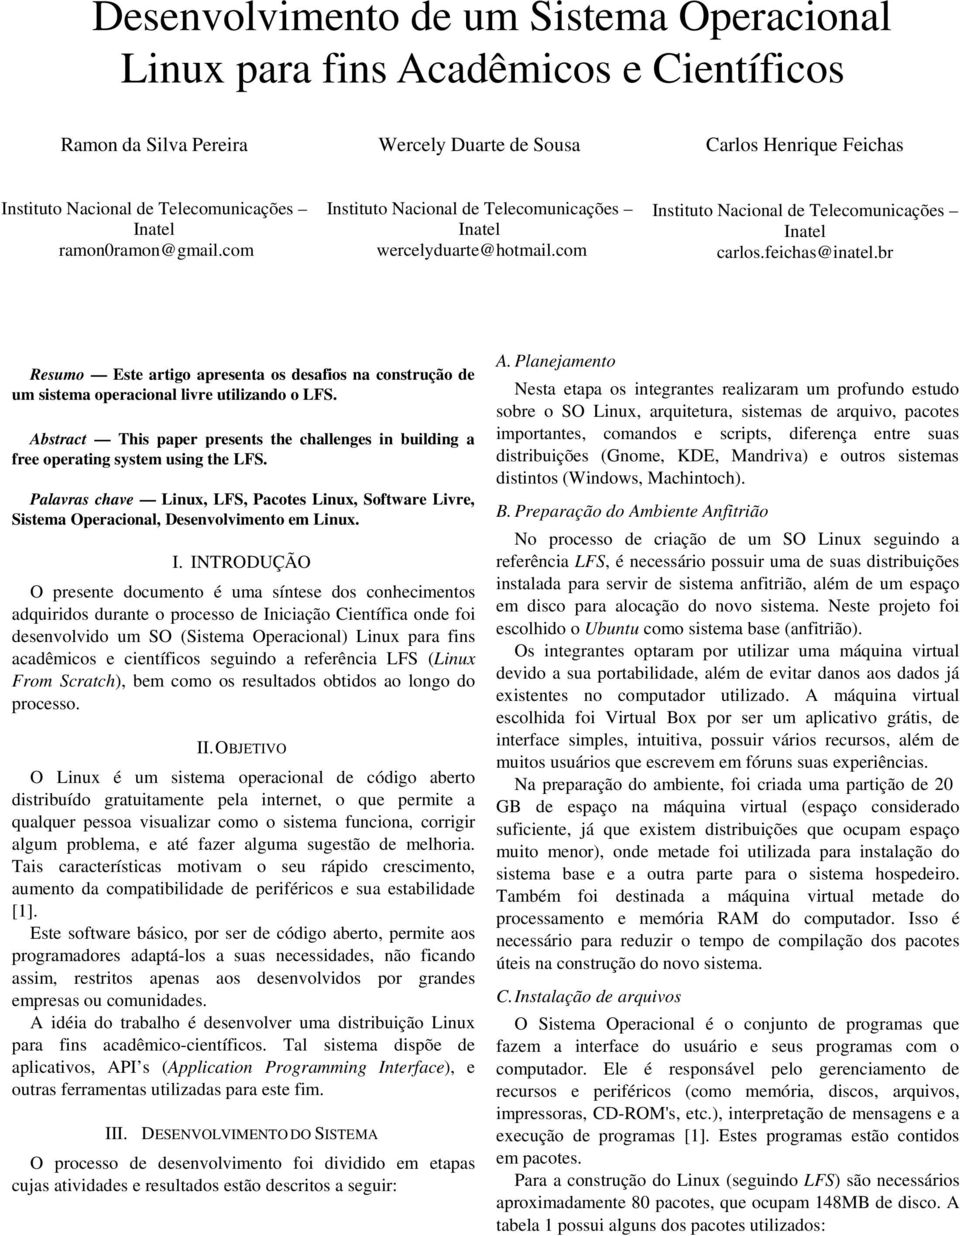 Abstract This paper presents the challenges in building a free operating system using the LFS. Palavras chave Linux, LFS, Pacotes Linux, Software Livre, Sistema Operacional, Desenvolvimento em Linux.